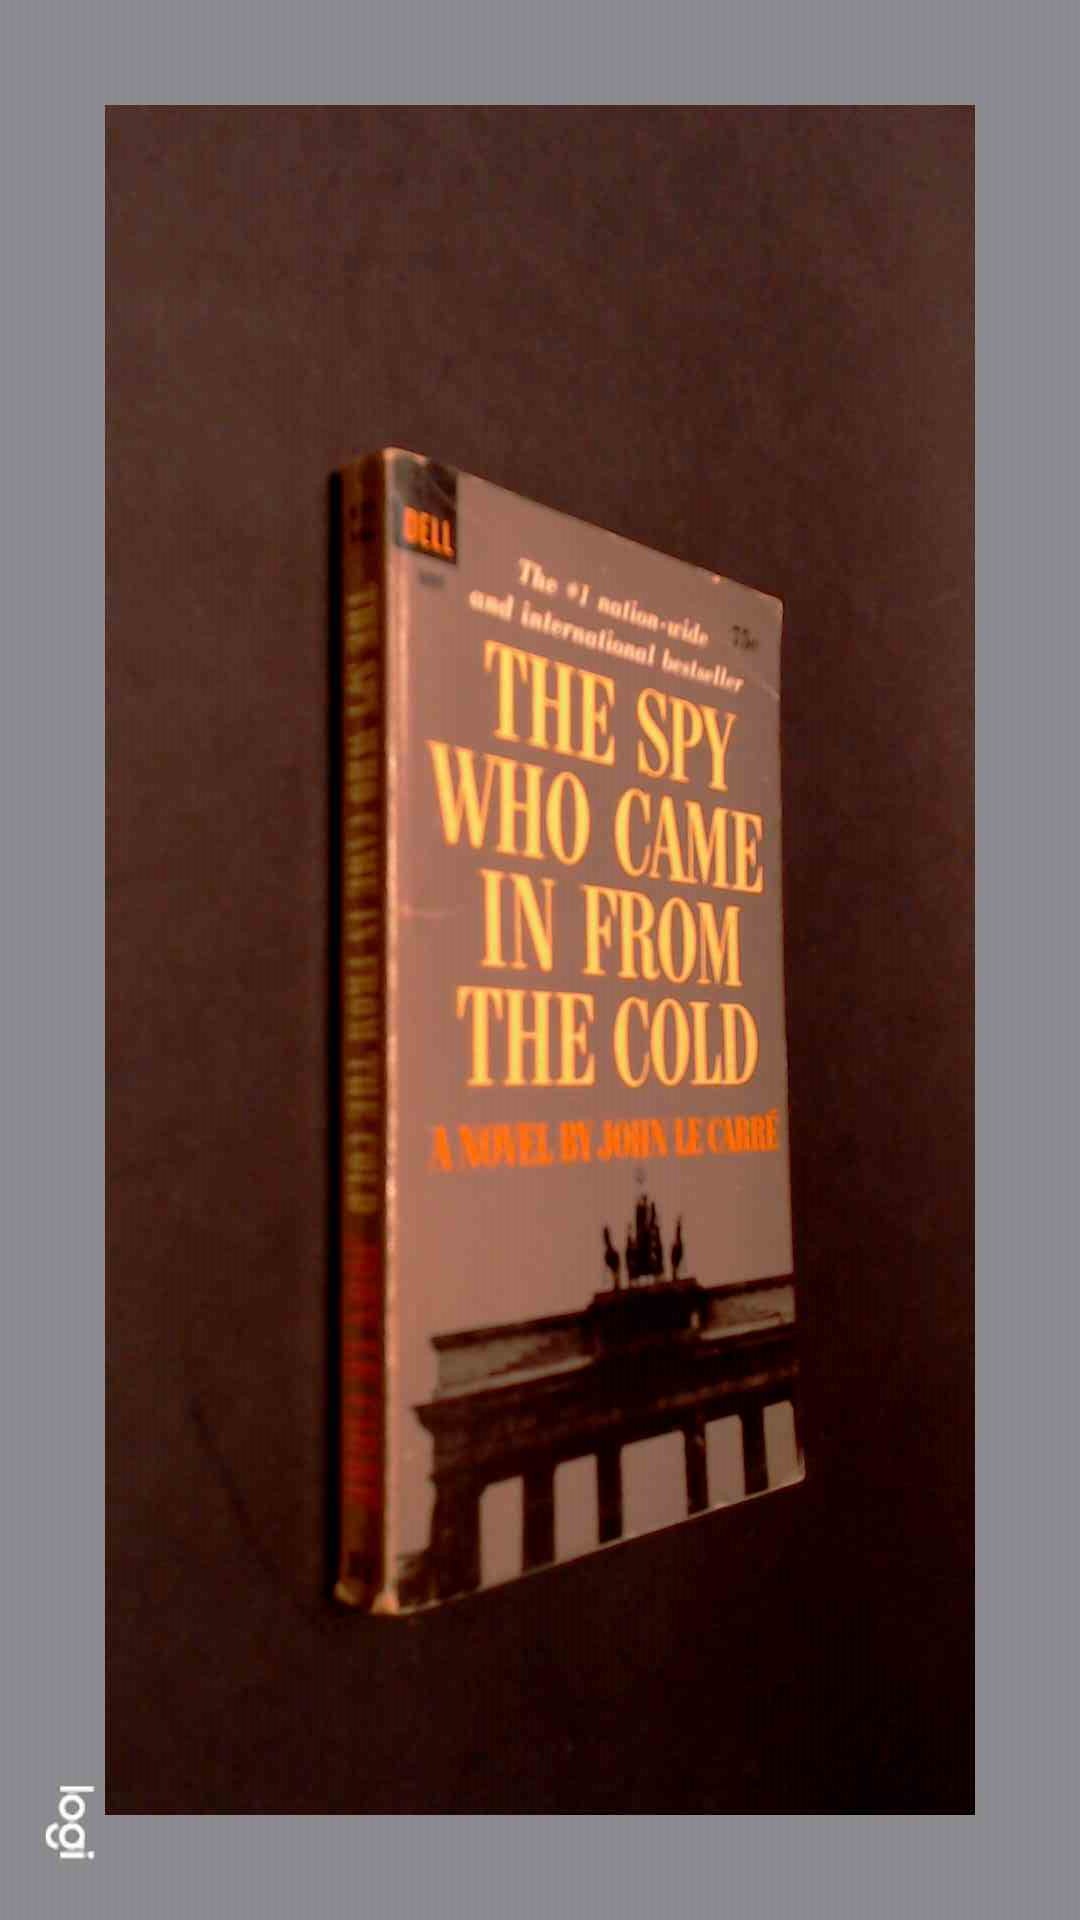 CARRE, JOHN LE - The spy who came in from the cold